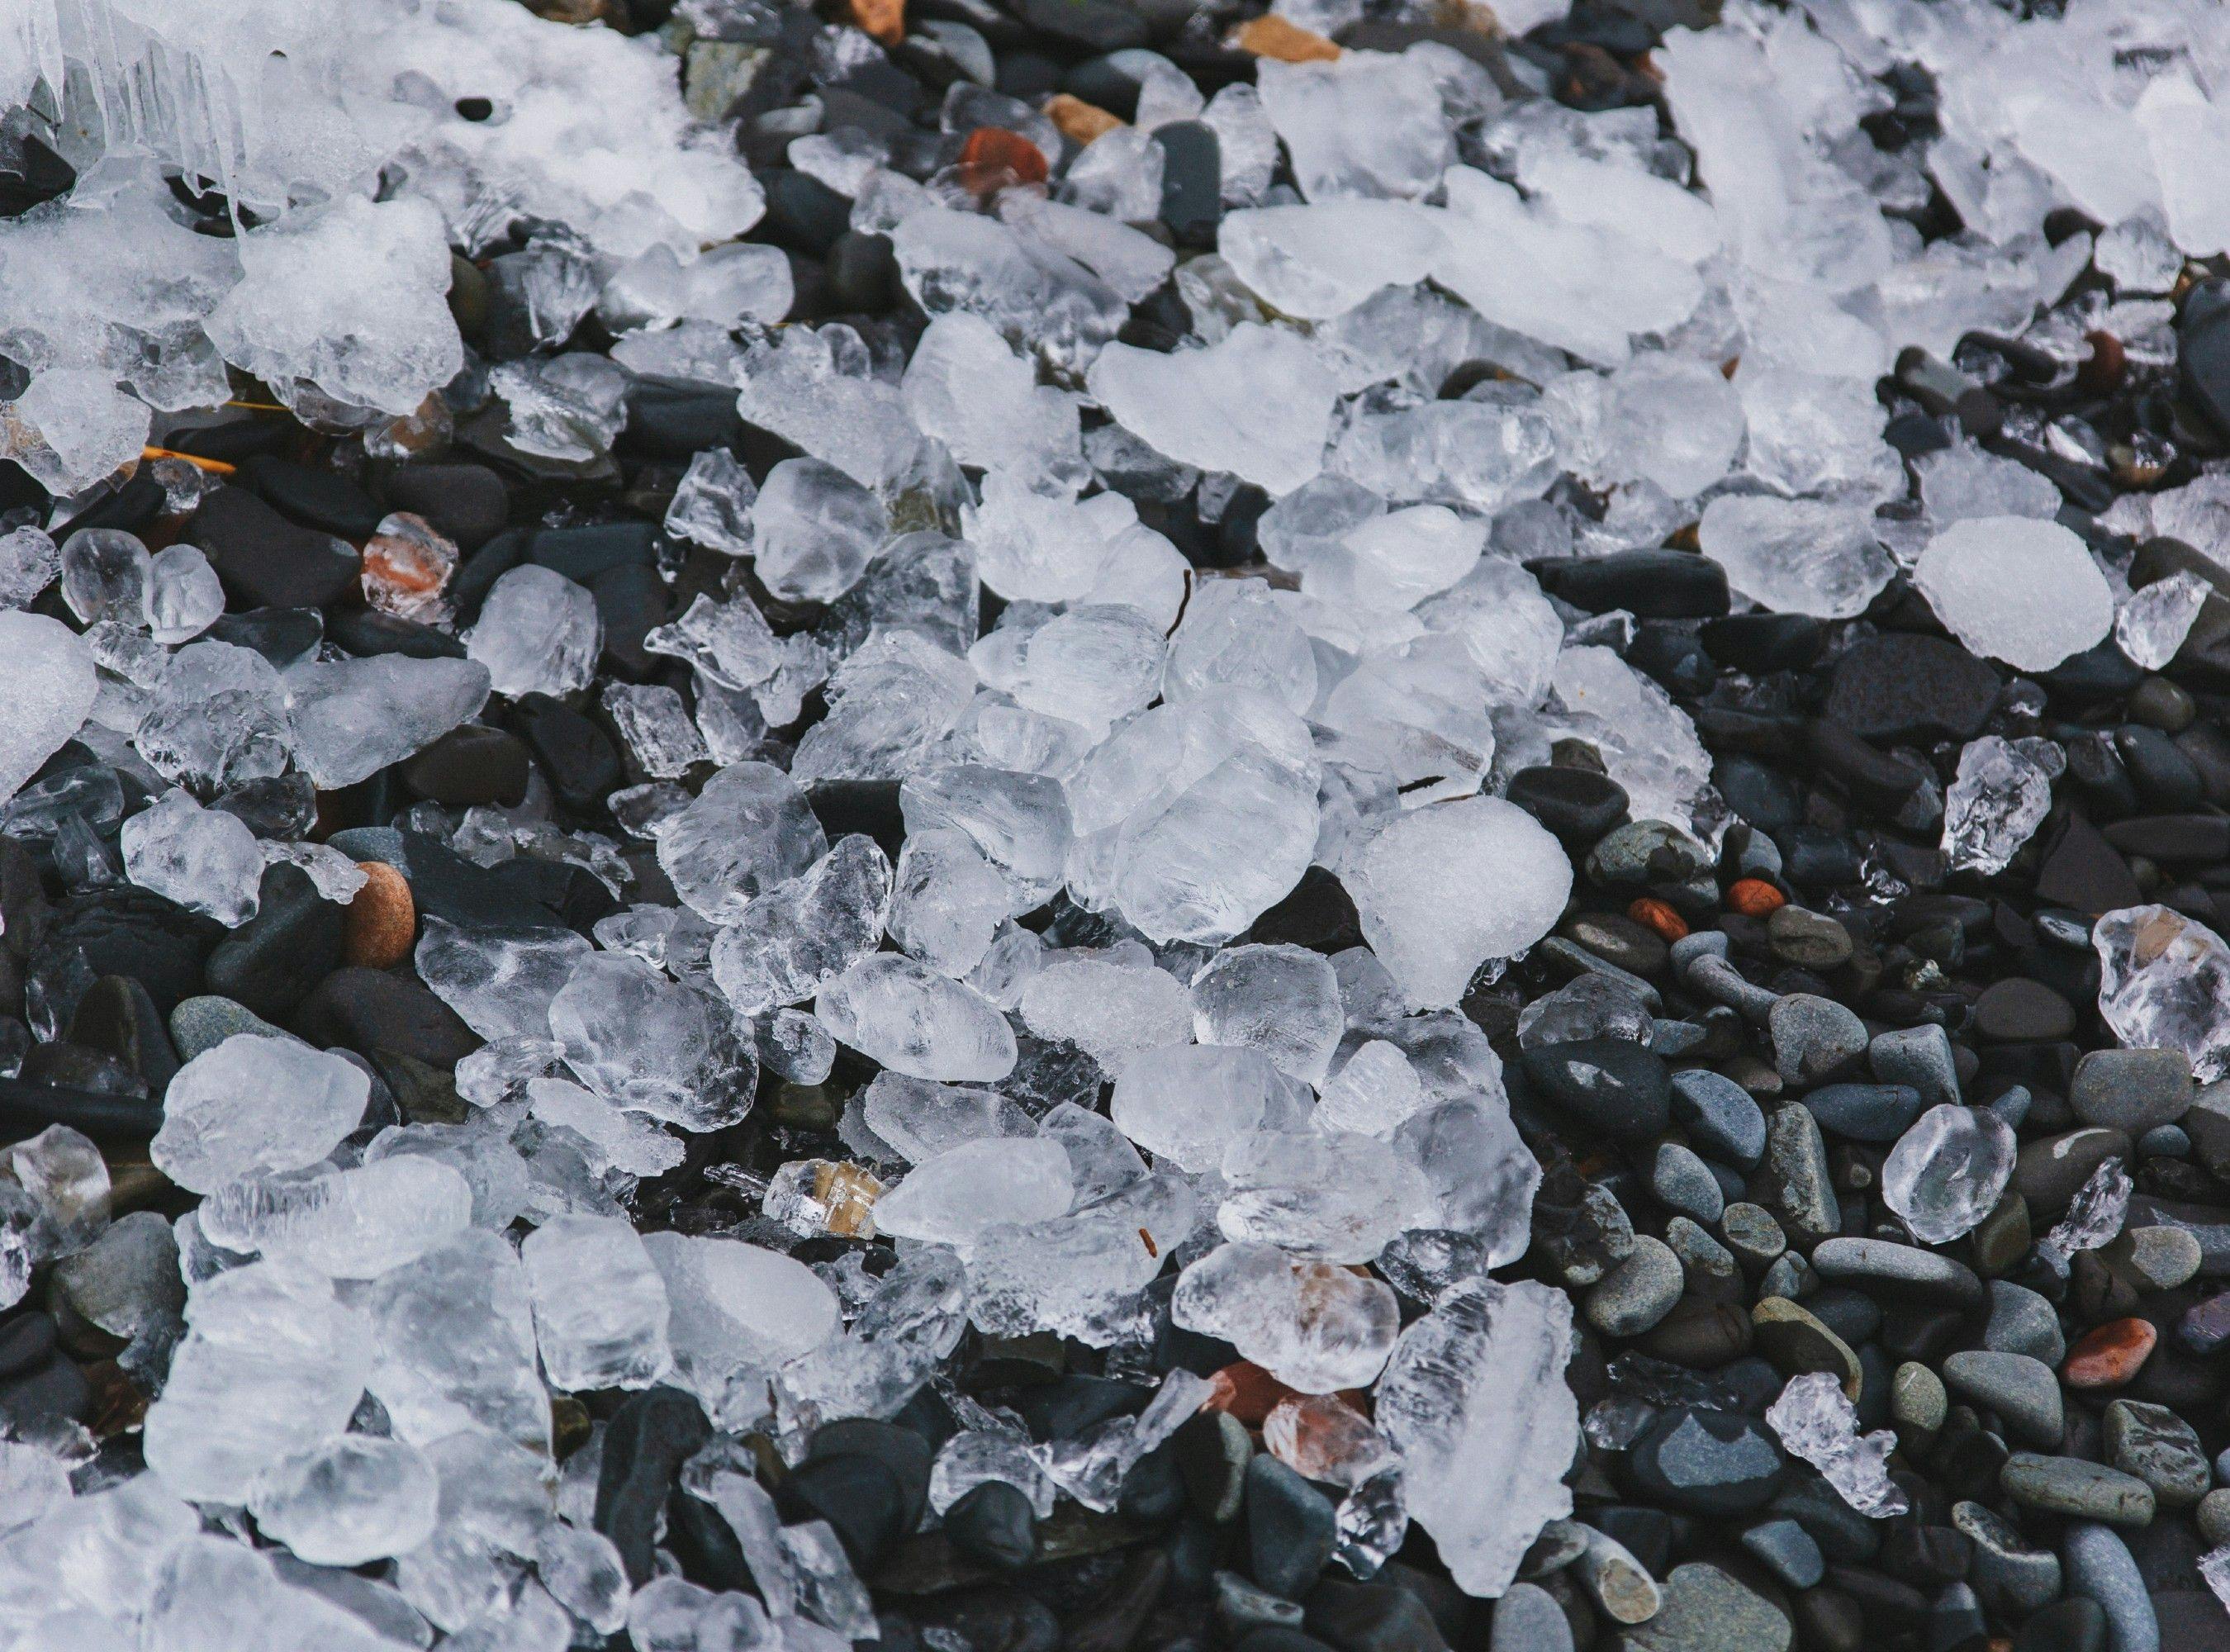 Weather Experts Investigate Extent to Which Hail Storm Damaged Property